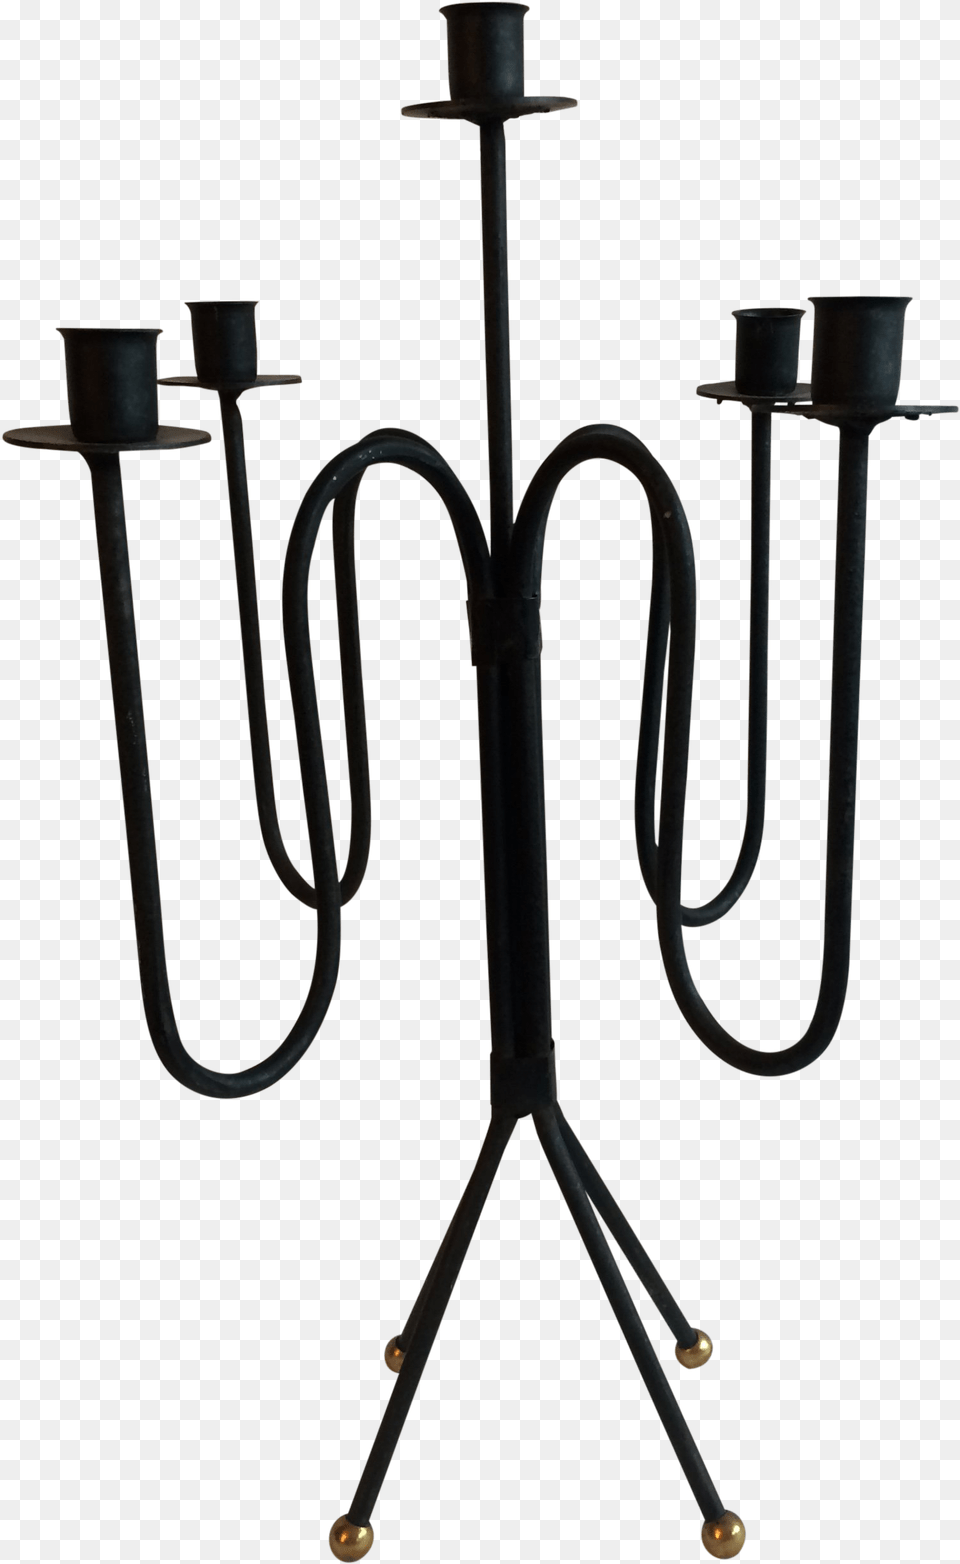 X 2721 1, Chandelier, Lamp, Candle, Mace Club Png